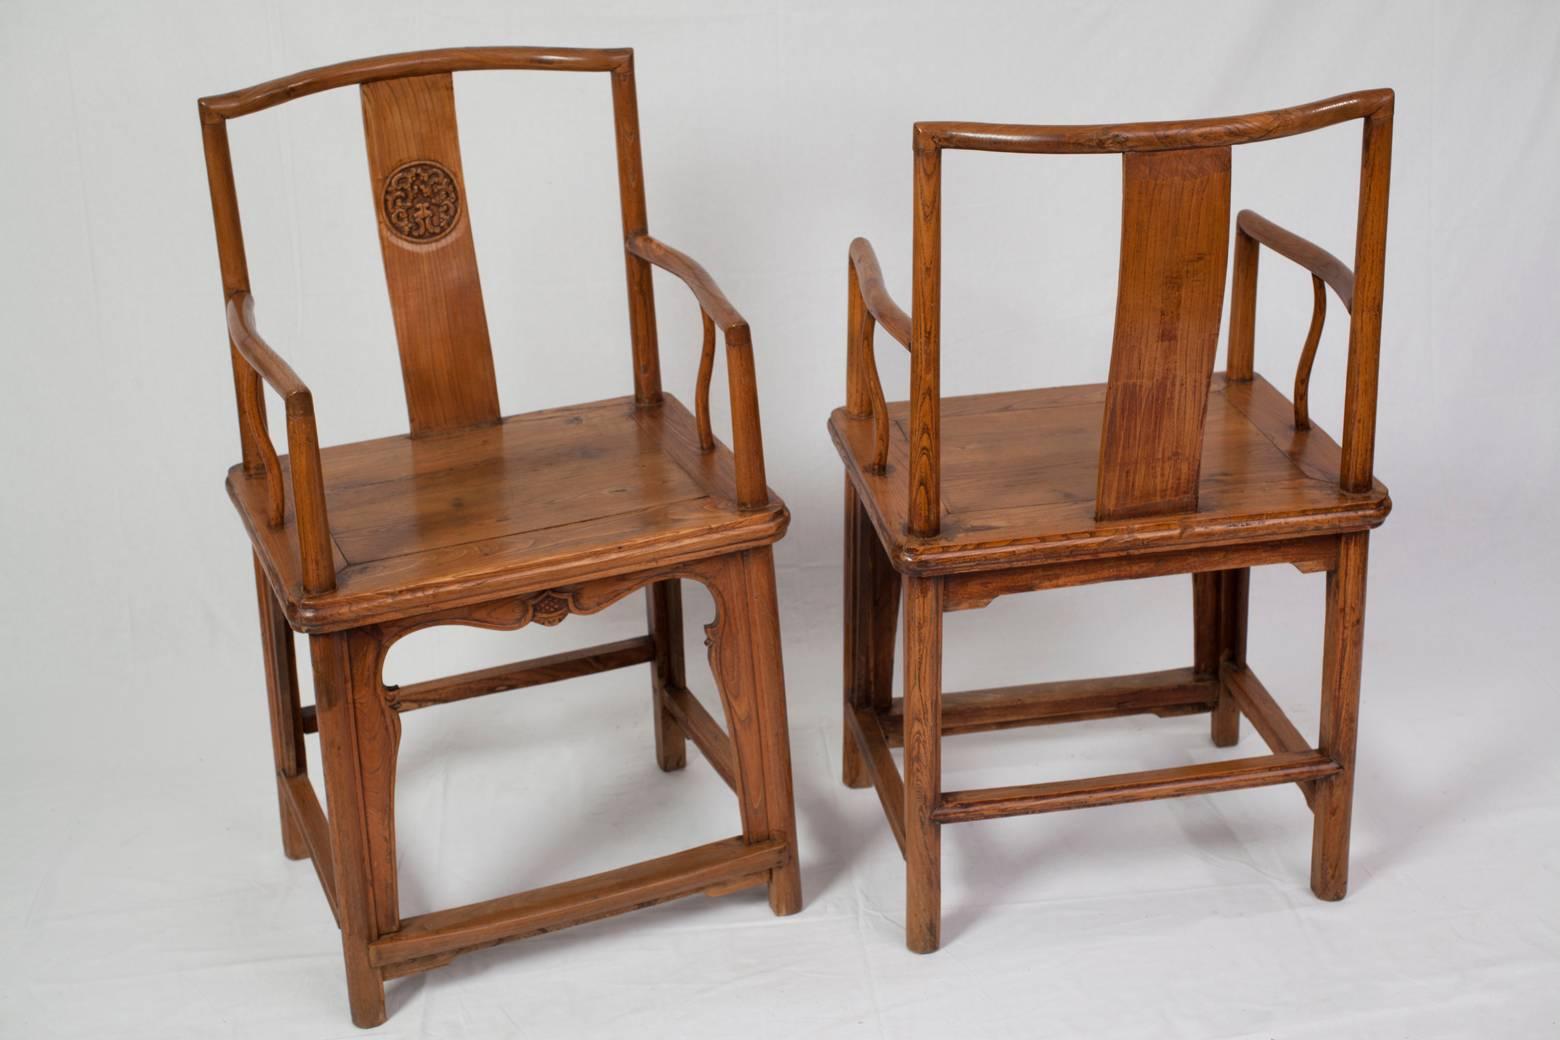 A lovely pair of mid-Qing dynasty continuous yoke-back Yumu armchairs from Shanxi province.
Raised on four square section legs and joined with stretchers. The apron is carved with a simple floral design. The armrest and backrest are elegantly